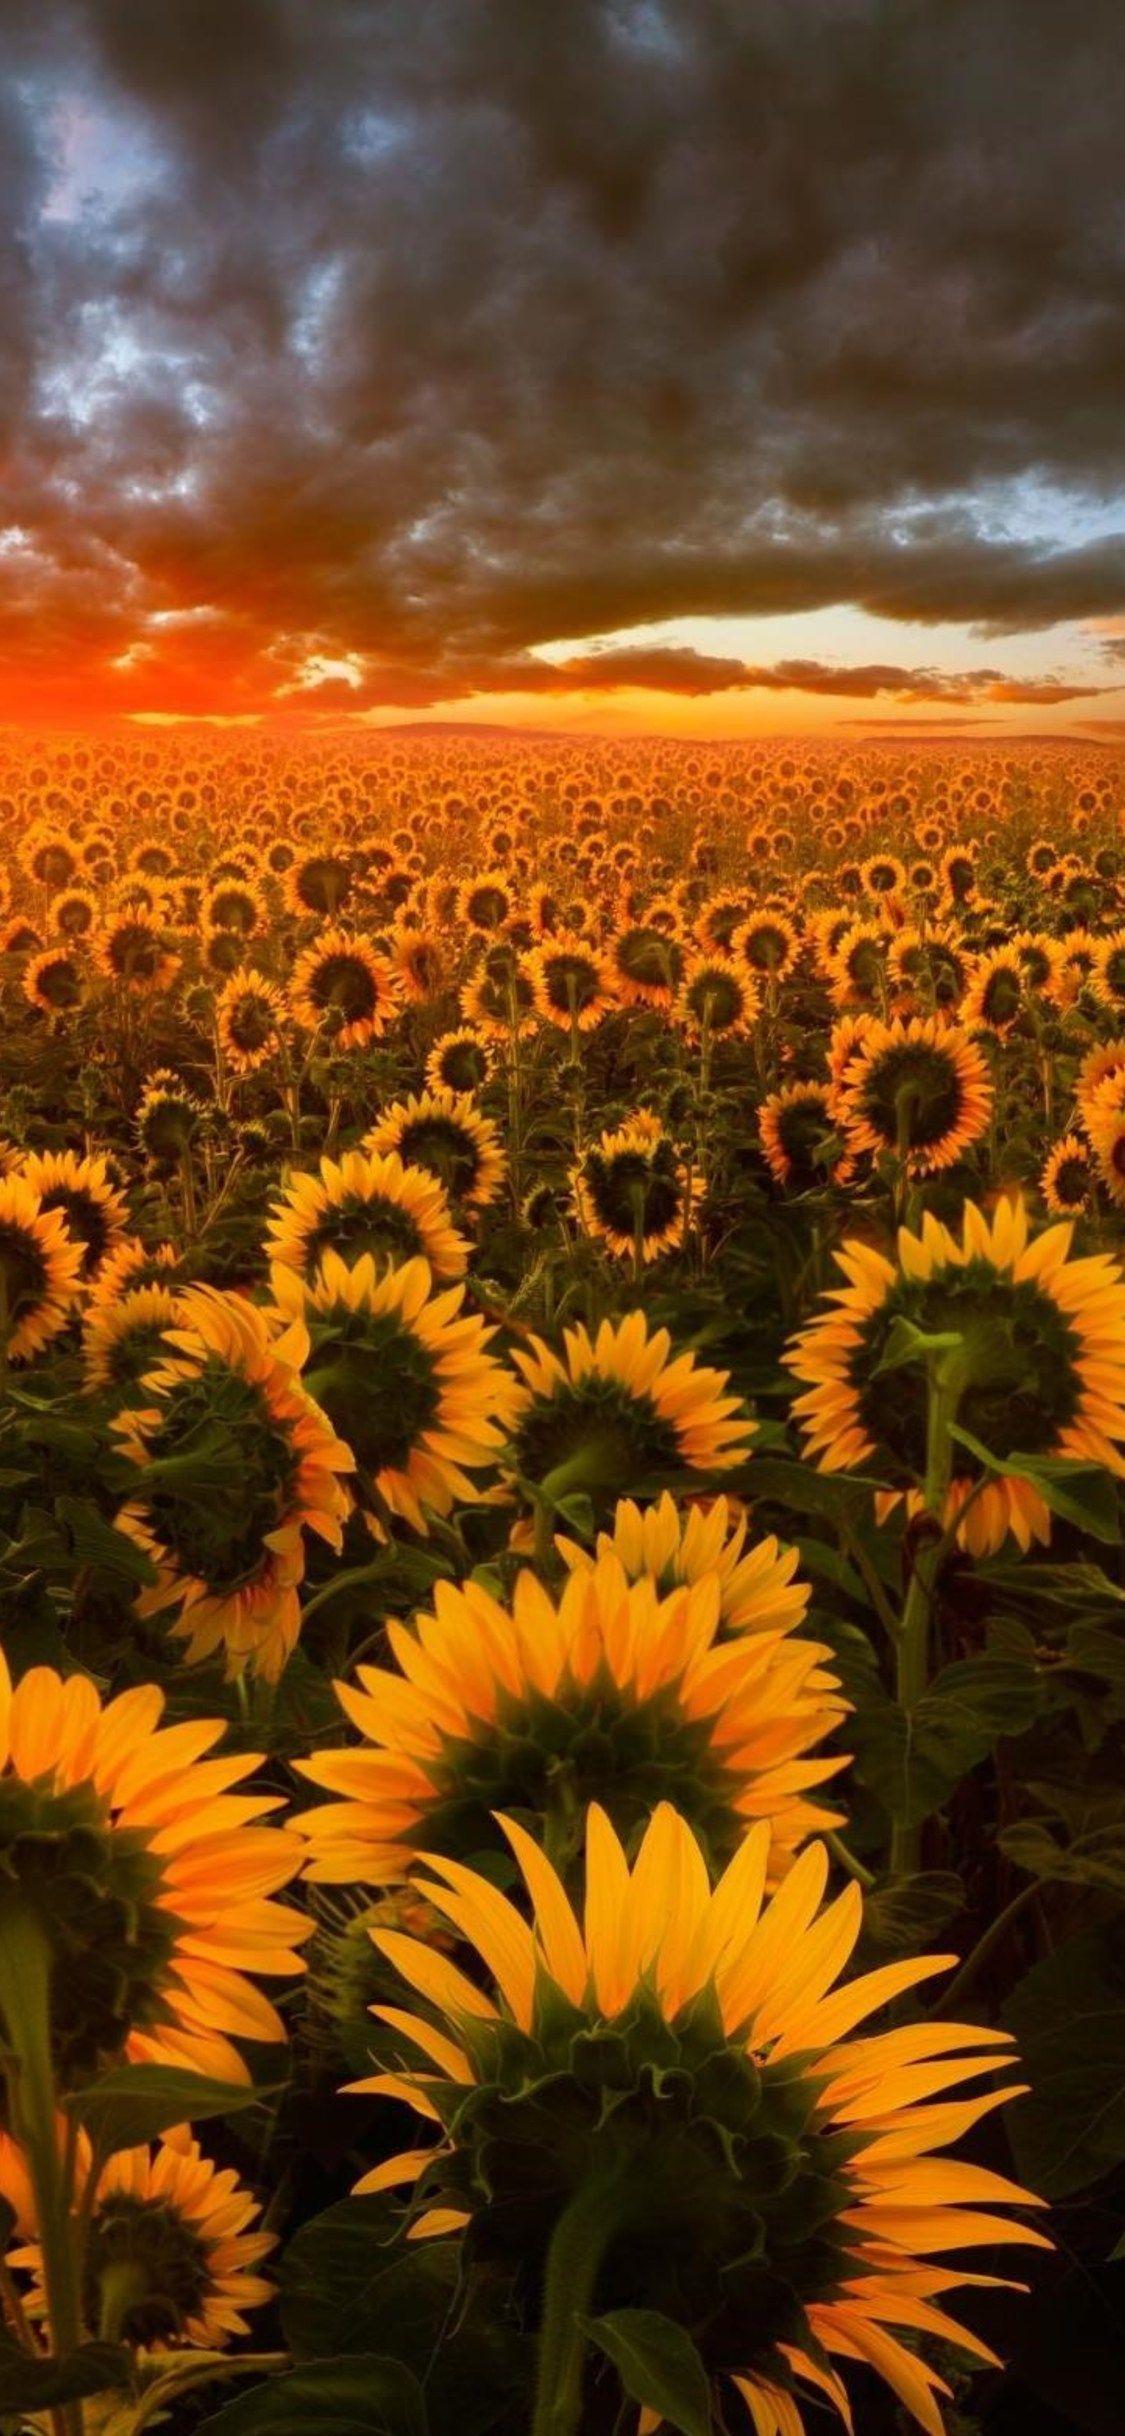 Sunflower iPhone Wallpapers - Wallpaper Cave